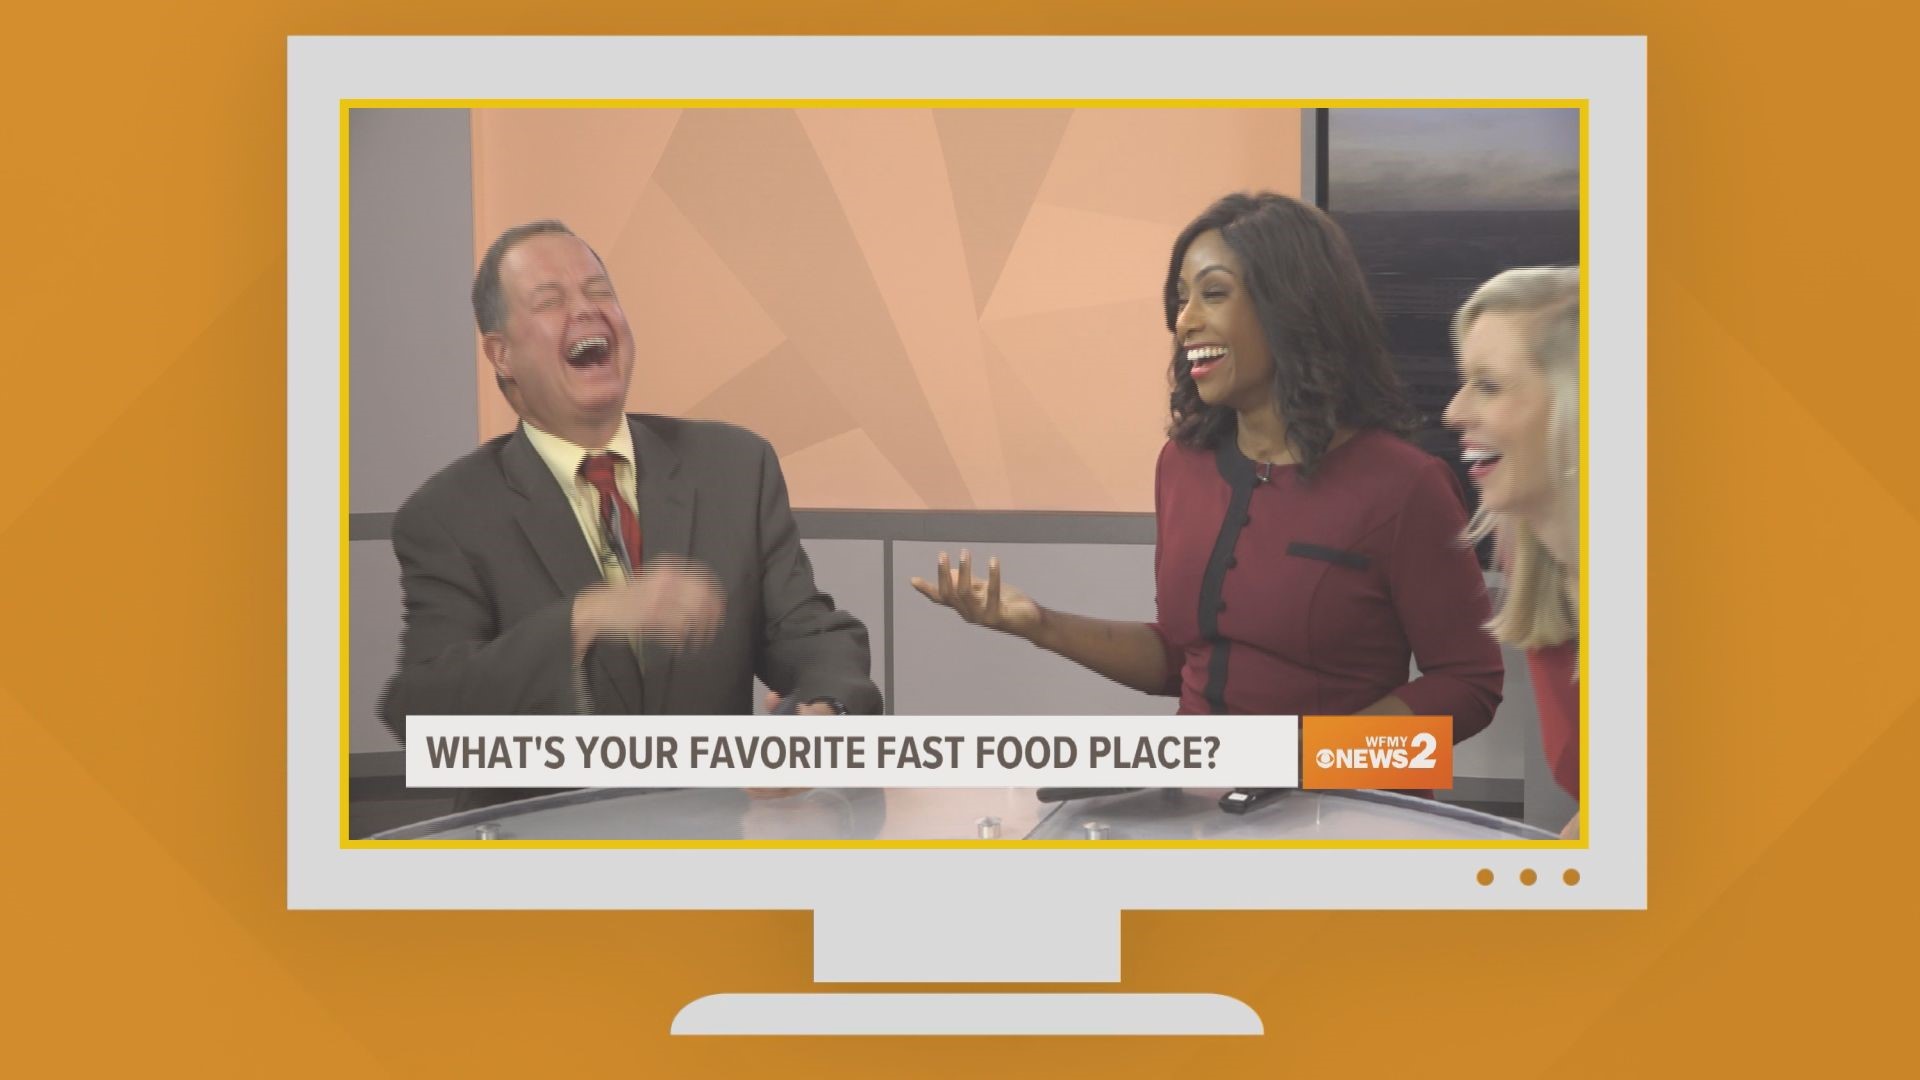 Let's start the weekend with a laugh. This is the best of the Good Morning Show!